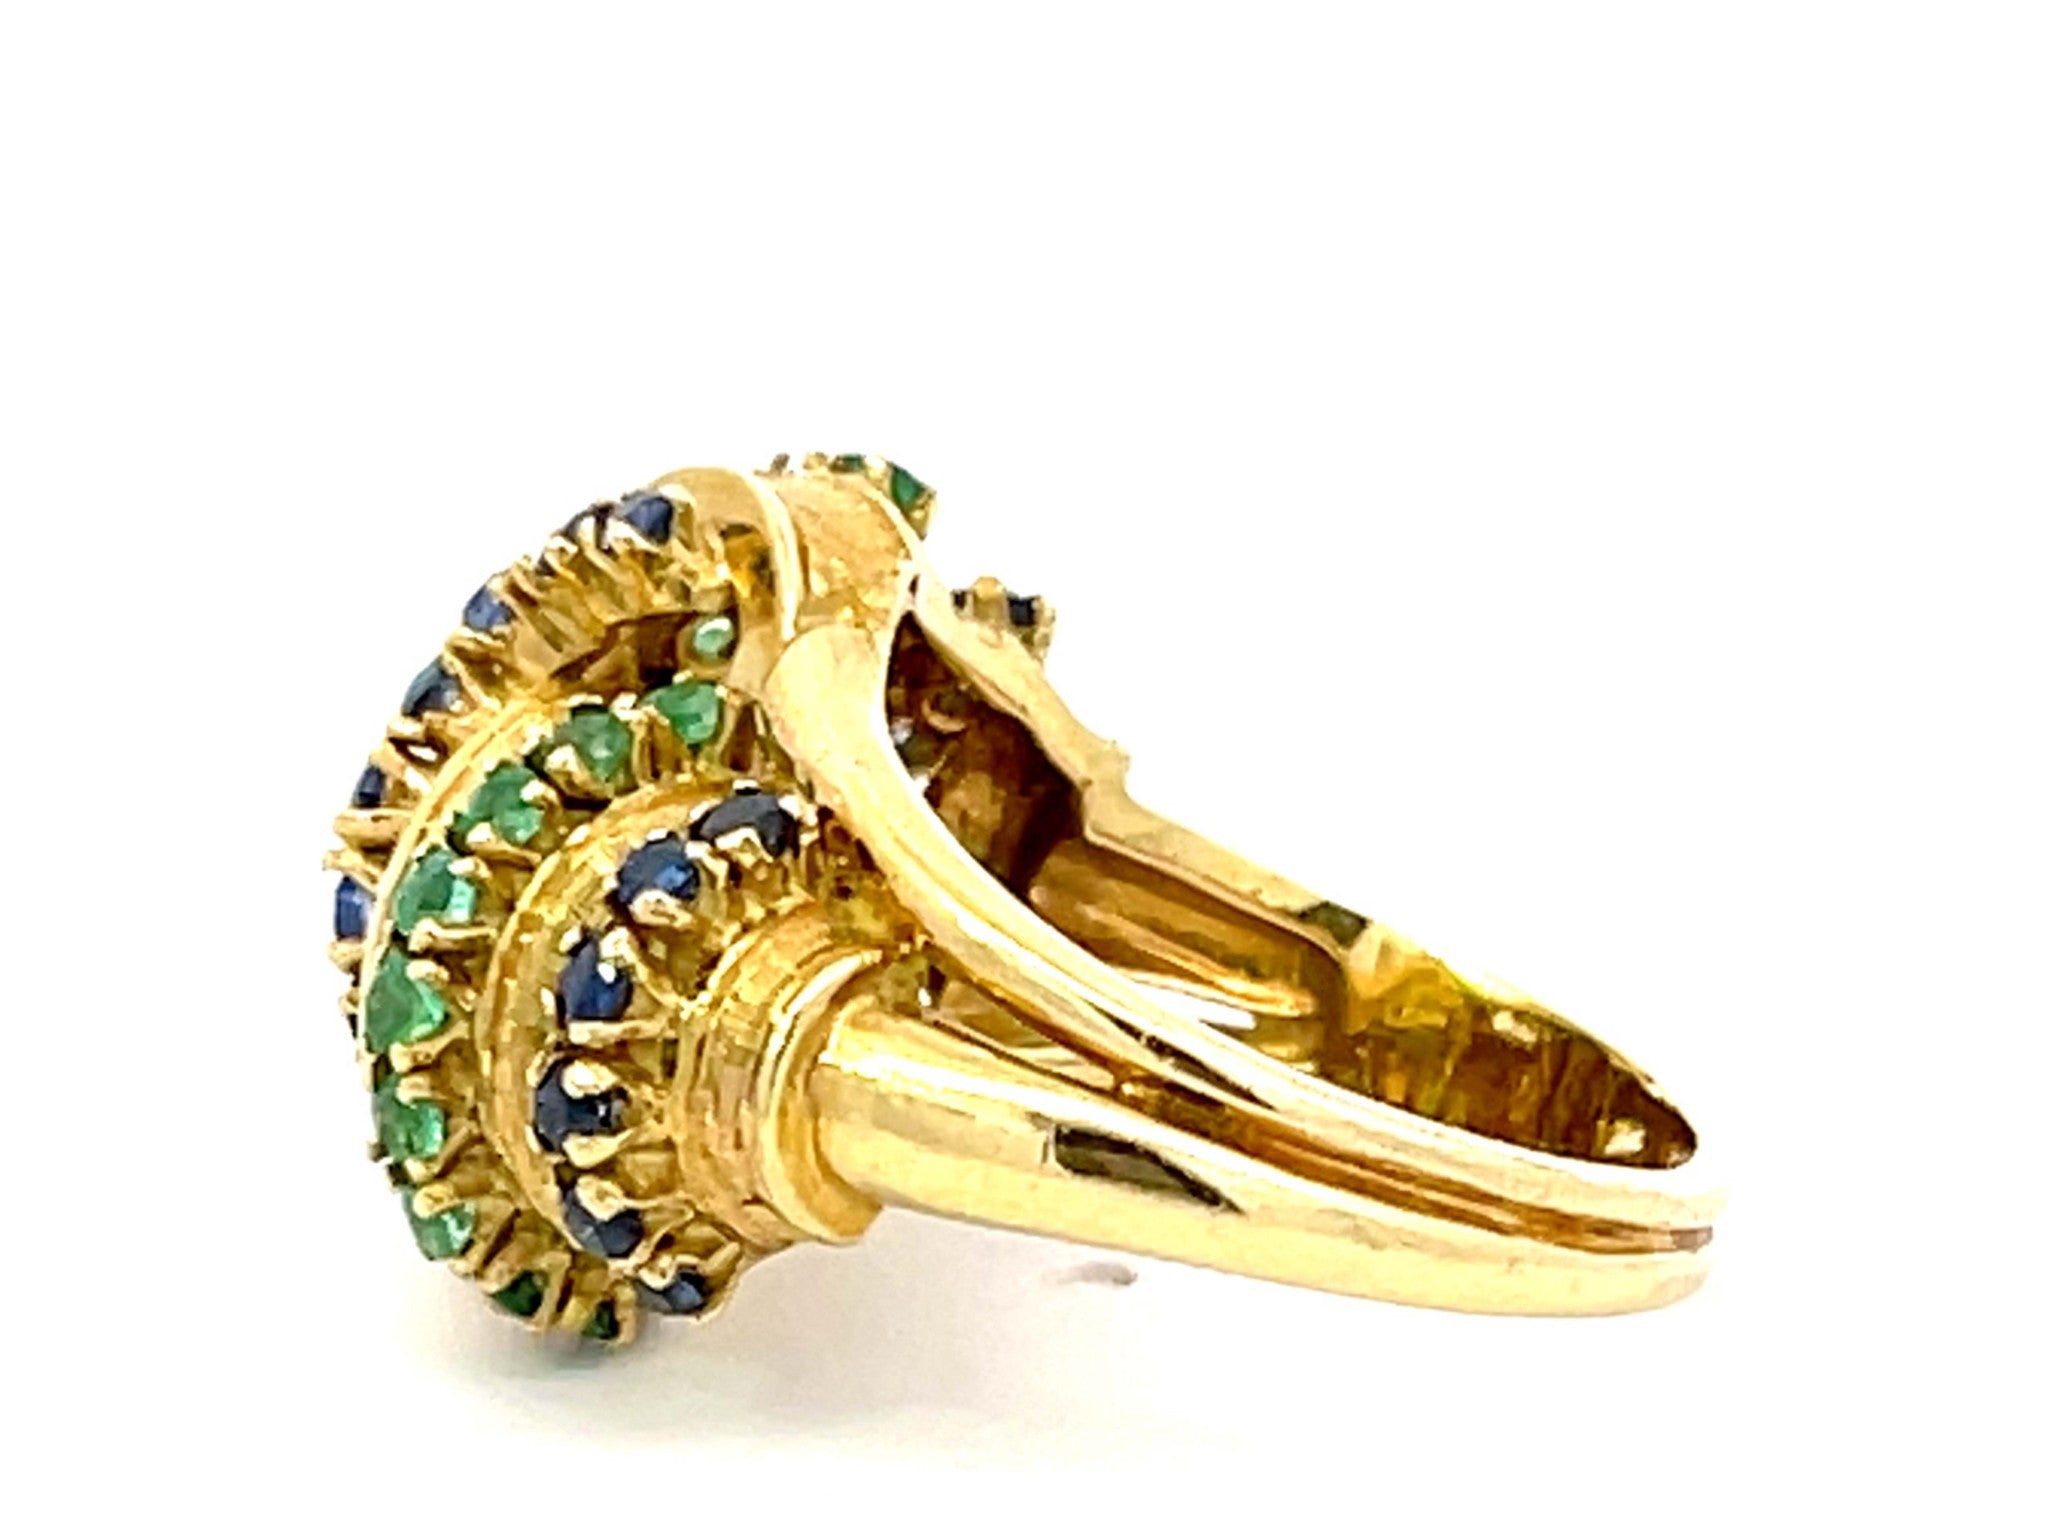 Alternating Sapphire and Emerald Rows Vintage Ring in 18k Yellow Gold